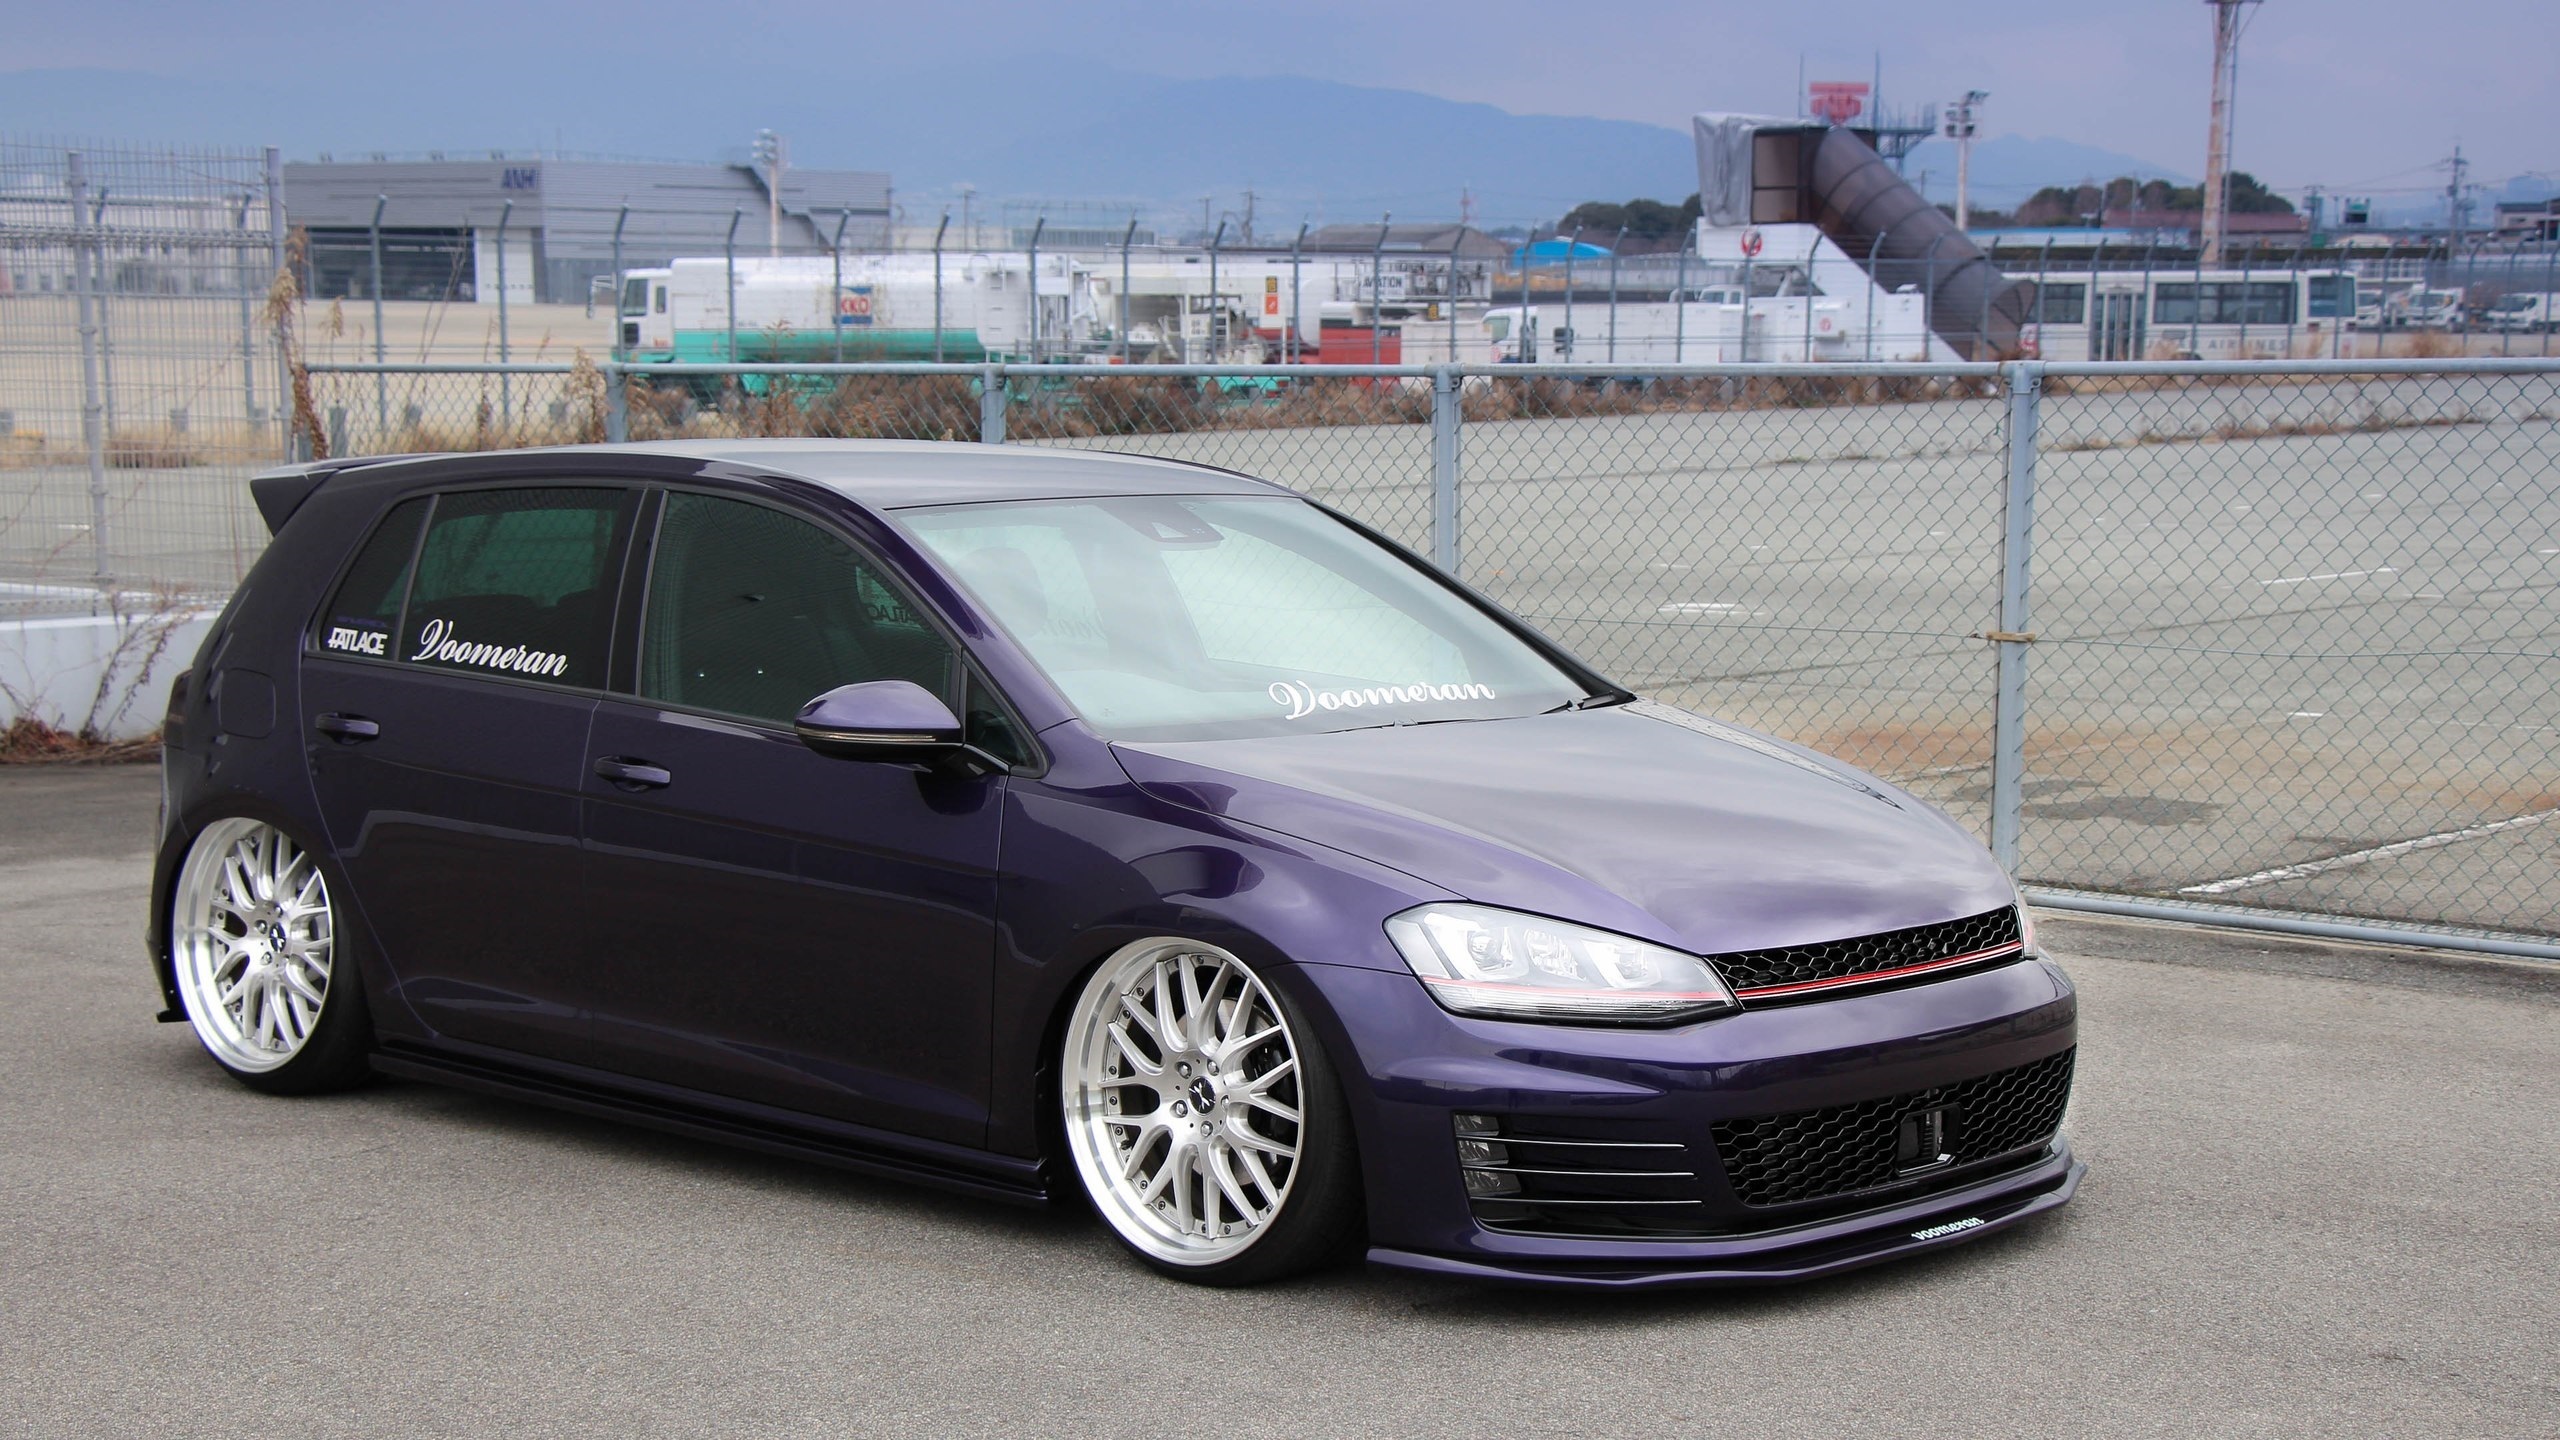 Wallpapers volkswagen vw golf low tuning stance germany gt r 1680x1050